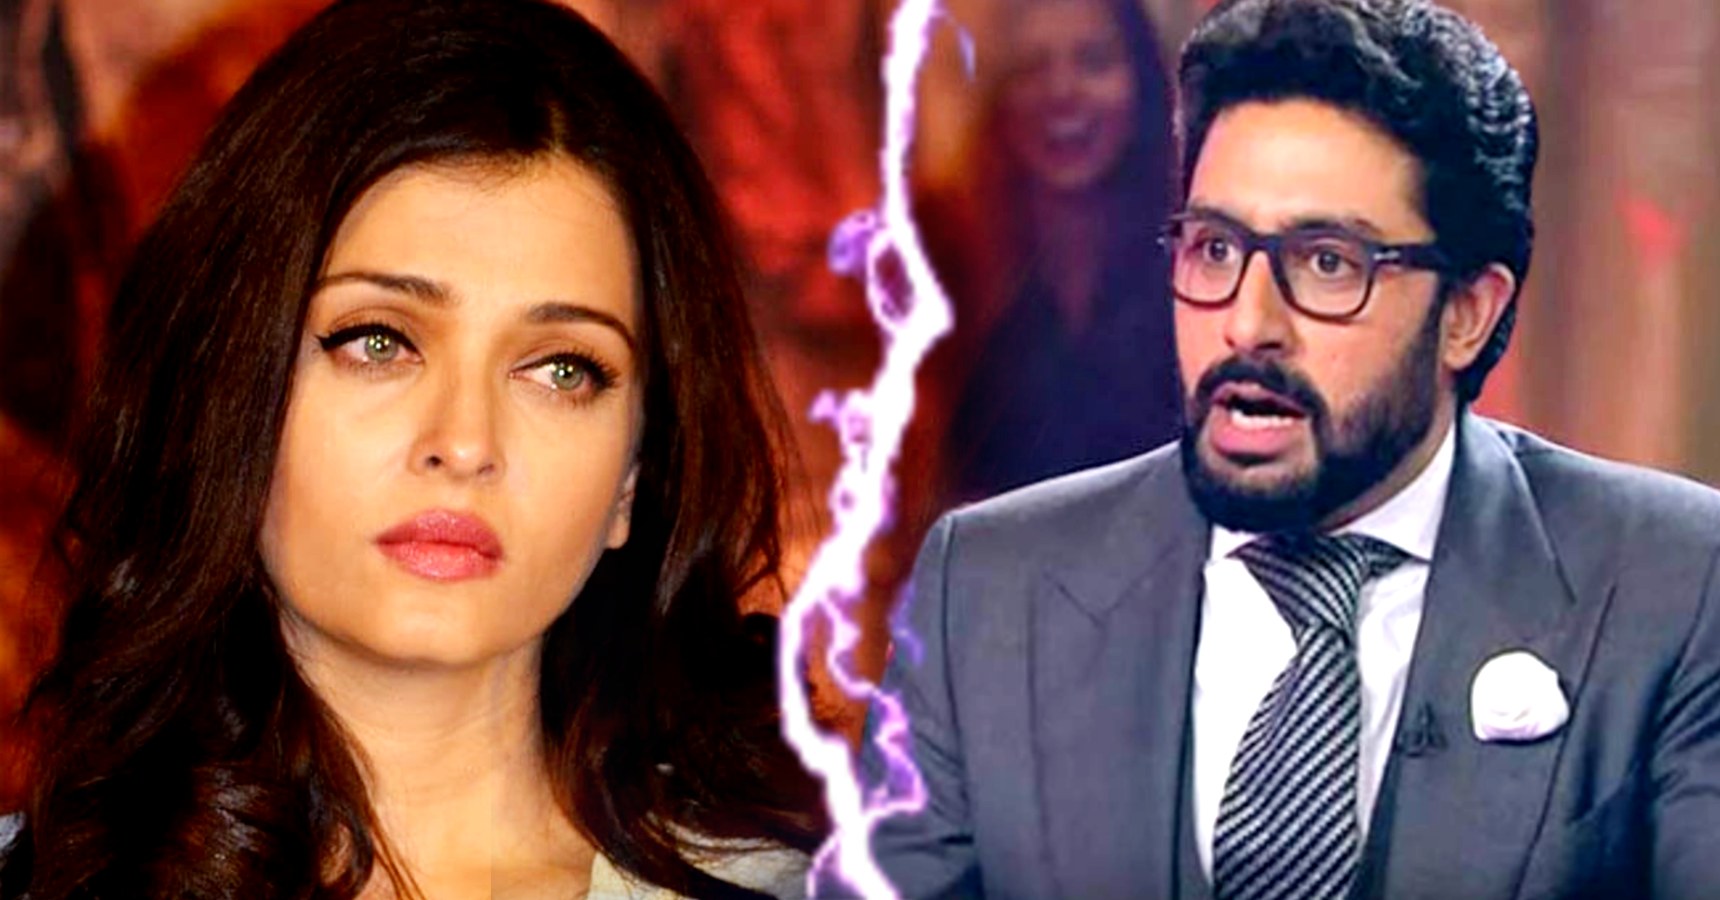 Abhishek Bachchan and Aishwarya Rai are reportedly getting divorced, actor tweet hints otherwise